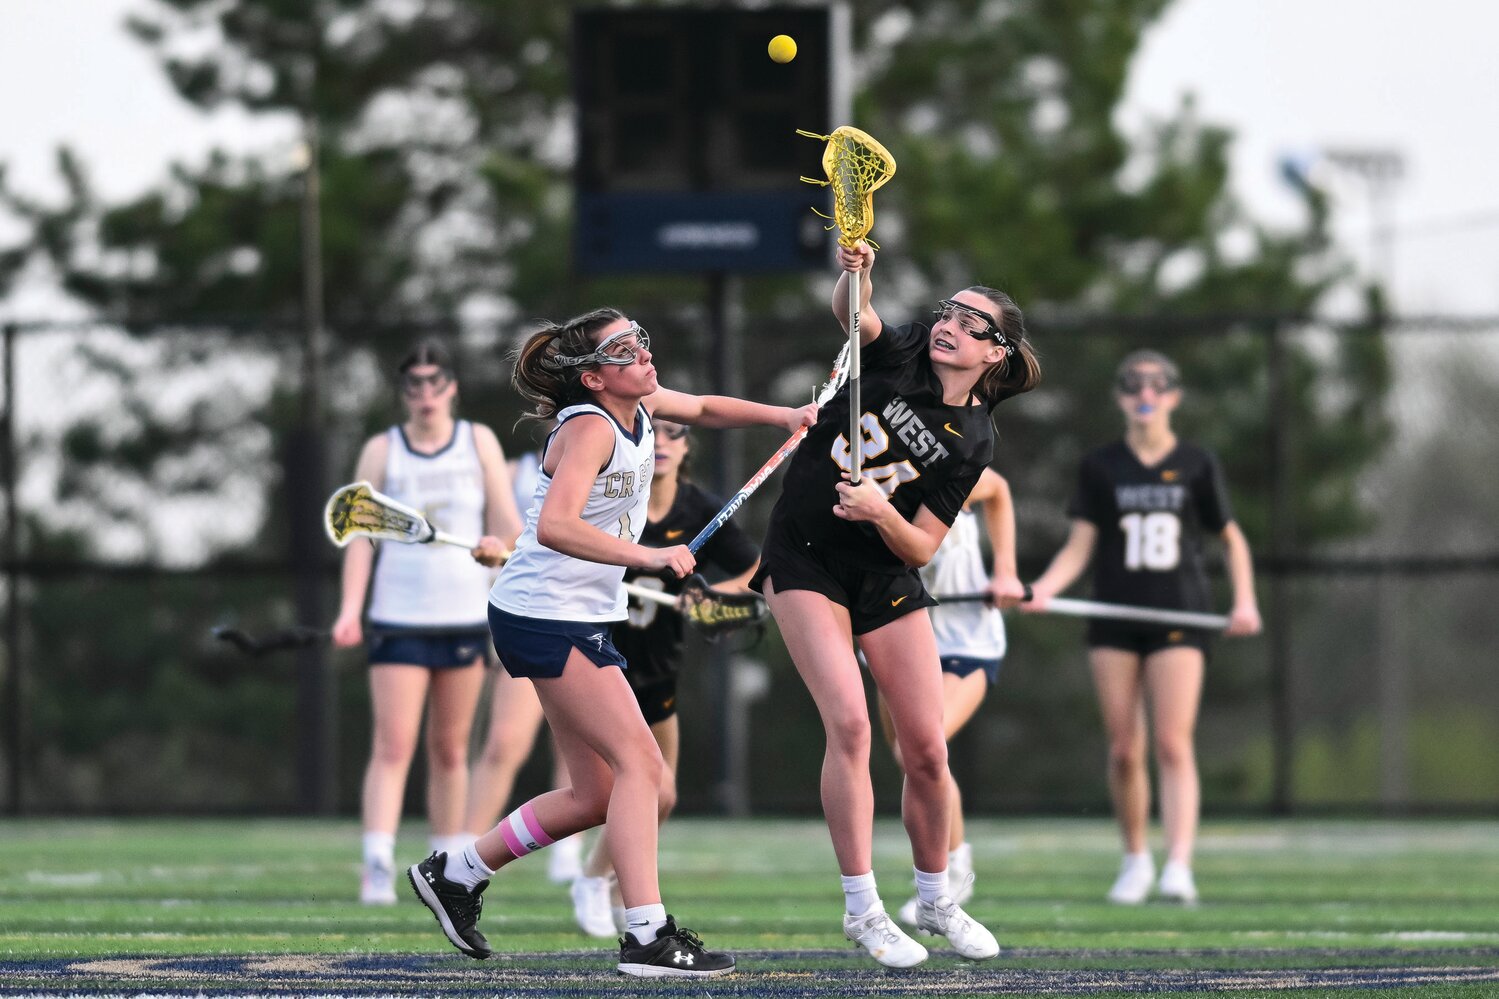 Central Bucks West’s Olivia Barrett gets the draw during a first quarter faceoff.